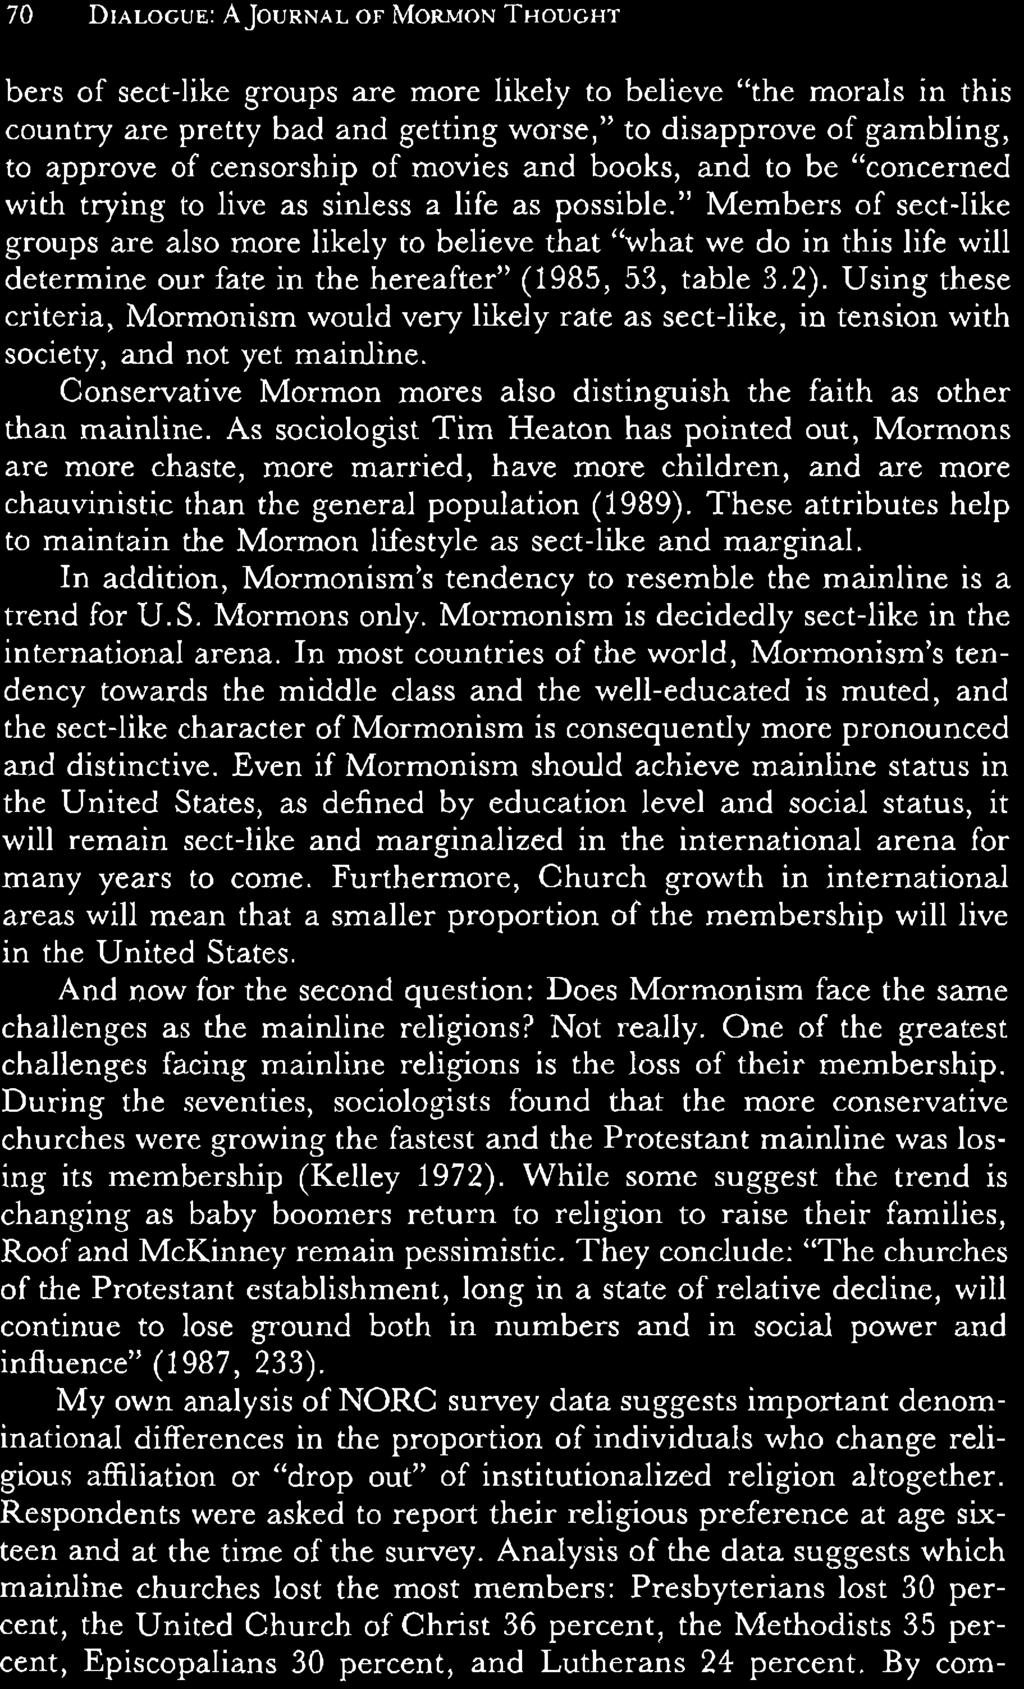 Even if Mormonism should achieve mainline status in the United States, as defined by education level and social status, it will remain sect-like and marginalized in the international arena for many